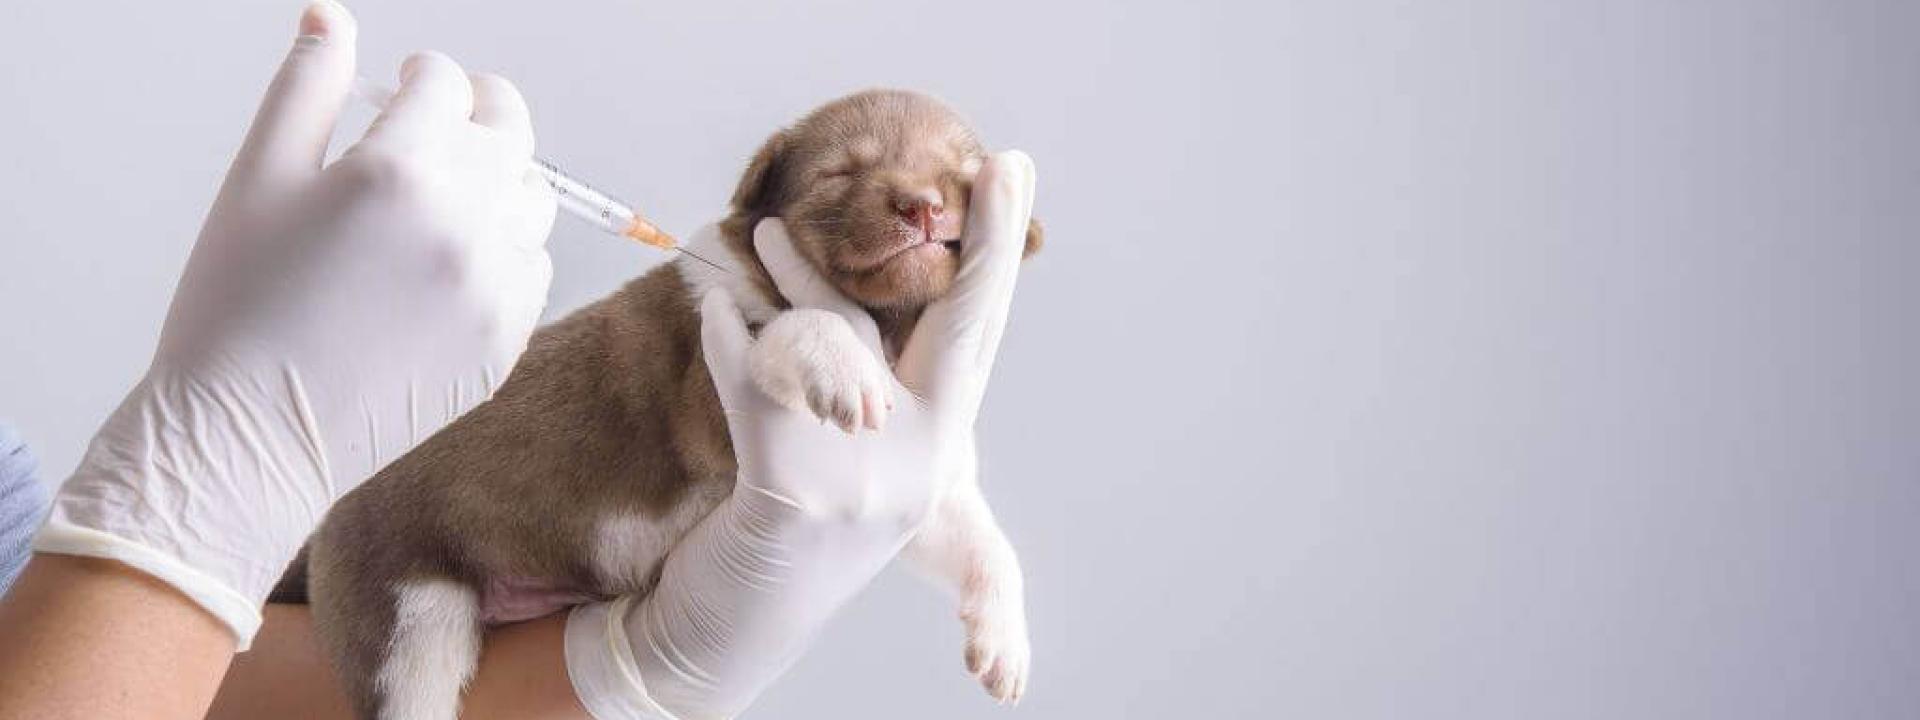 dog vaccination info for national pet immunization month